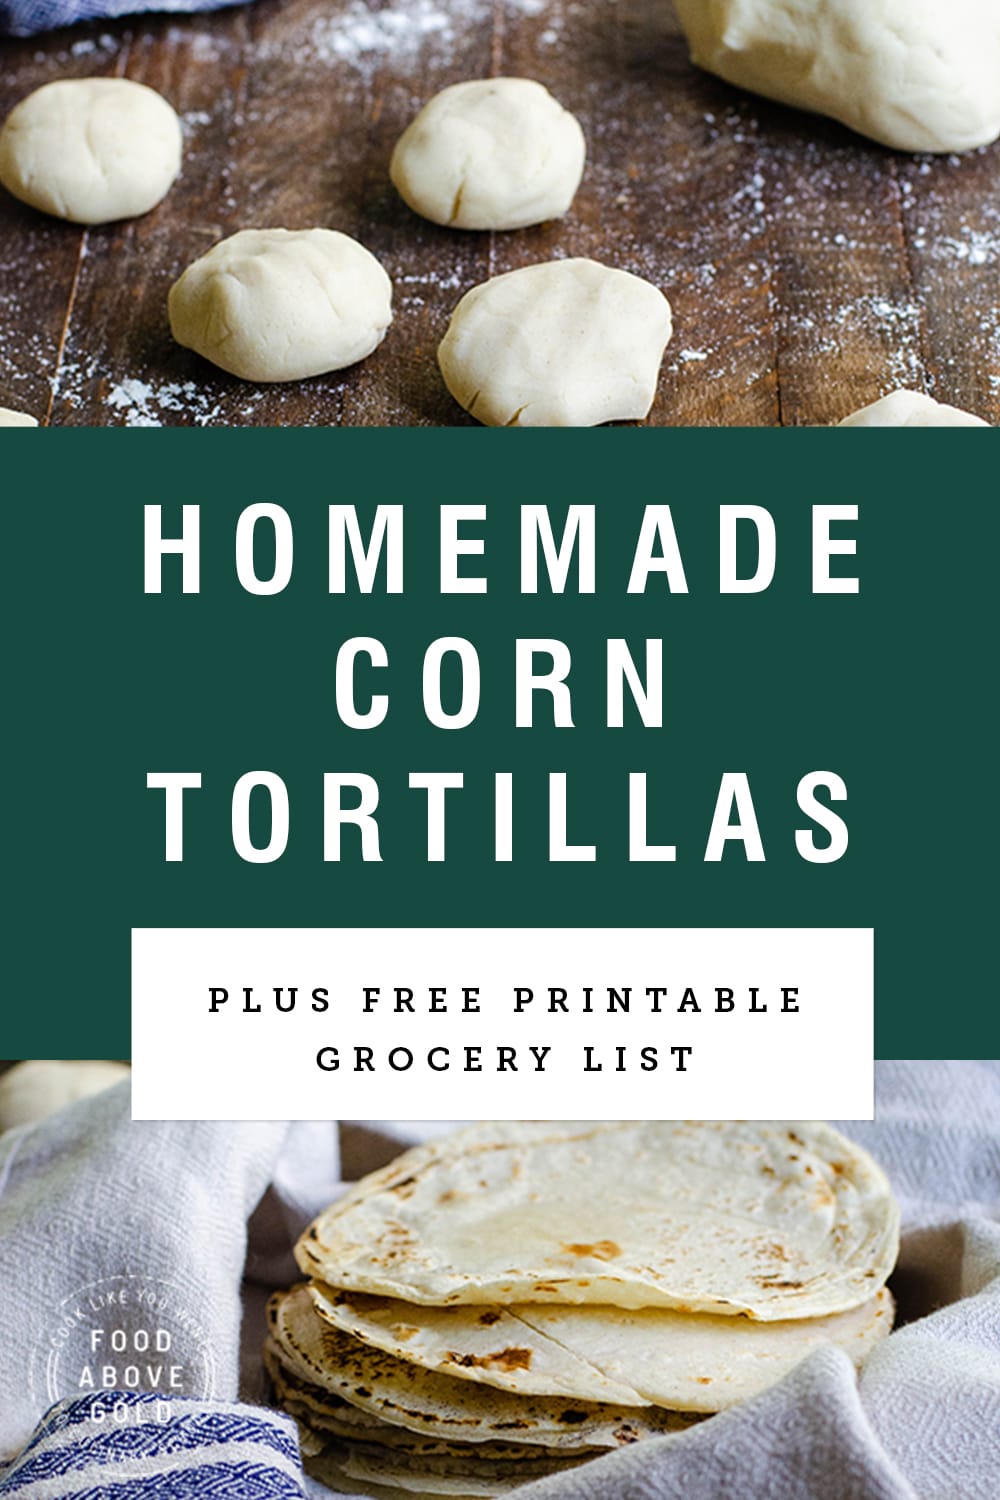 Homemade Corn Tortillas That Don't Fall Apart - Food Above Gold